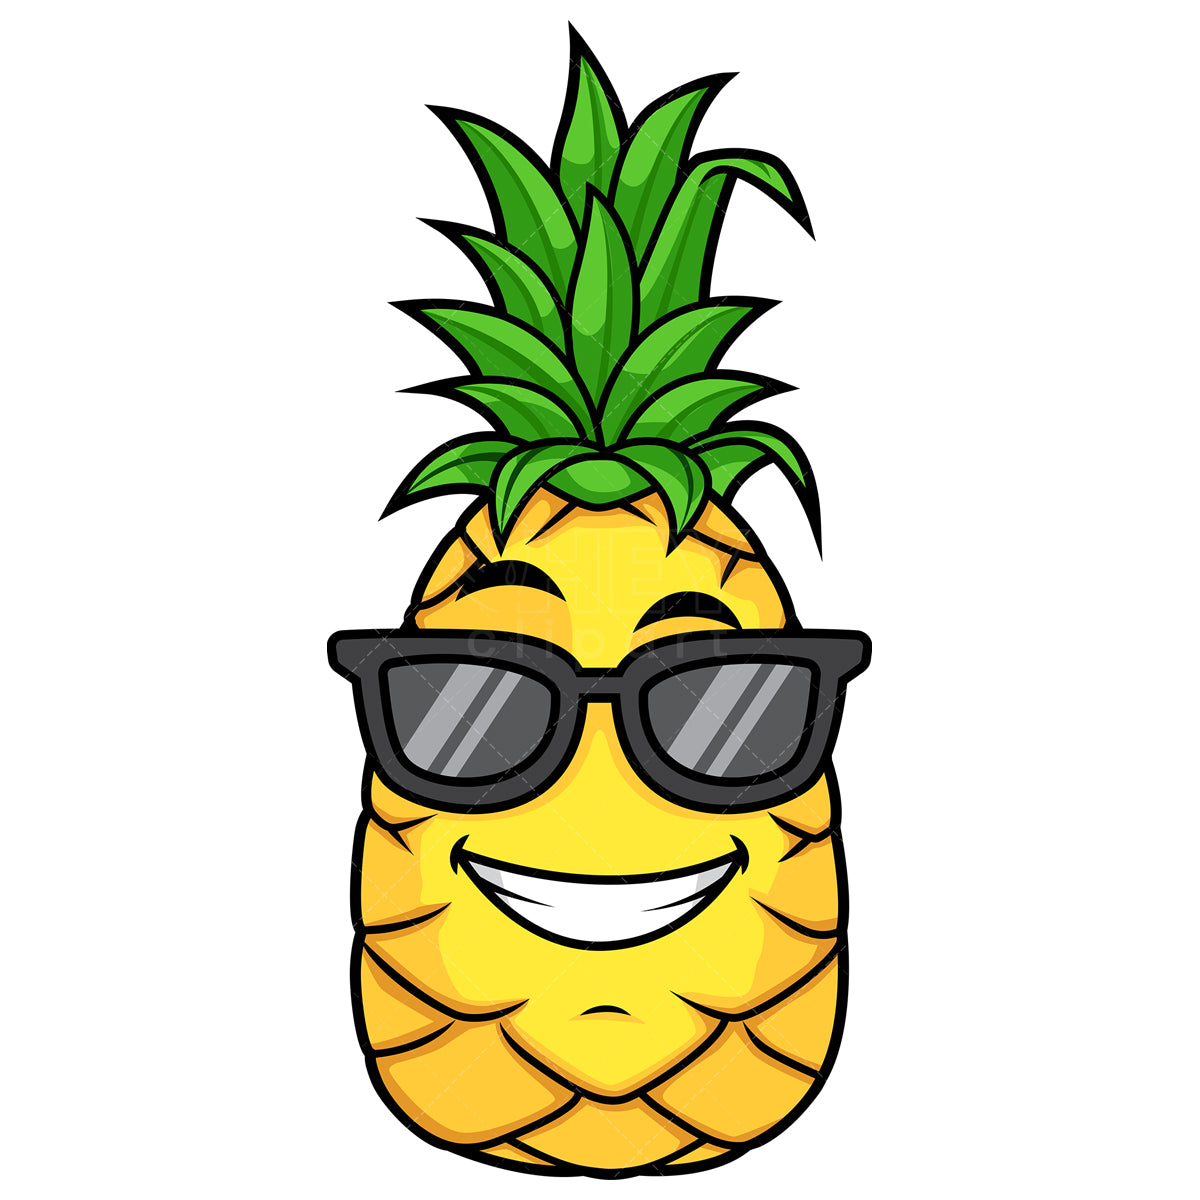 Royalty-free stock vector illustration of  a pineapple wearing sunglasses.